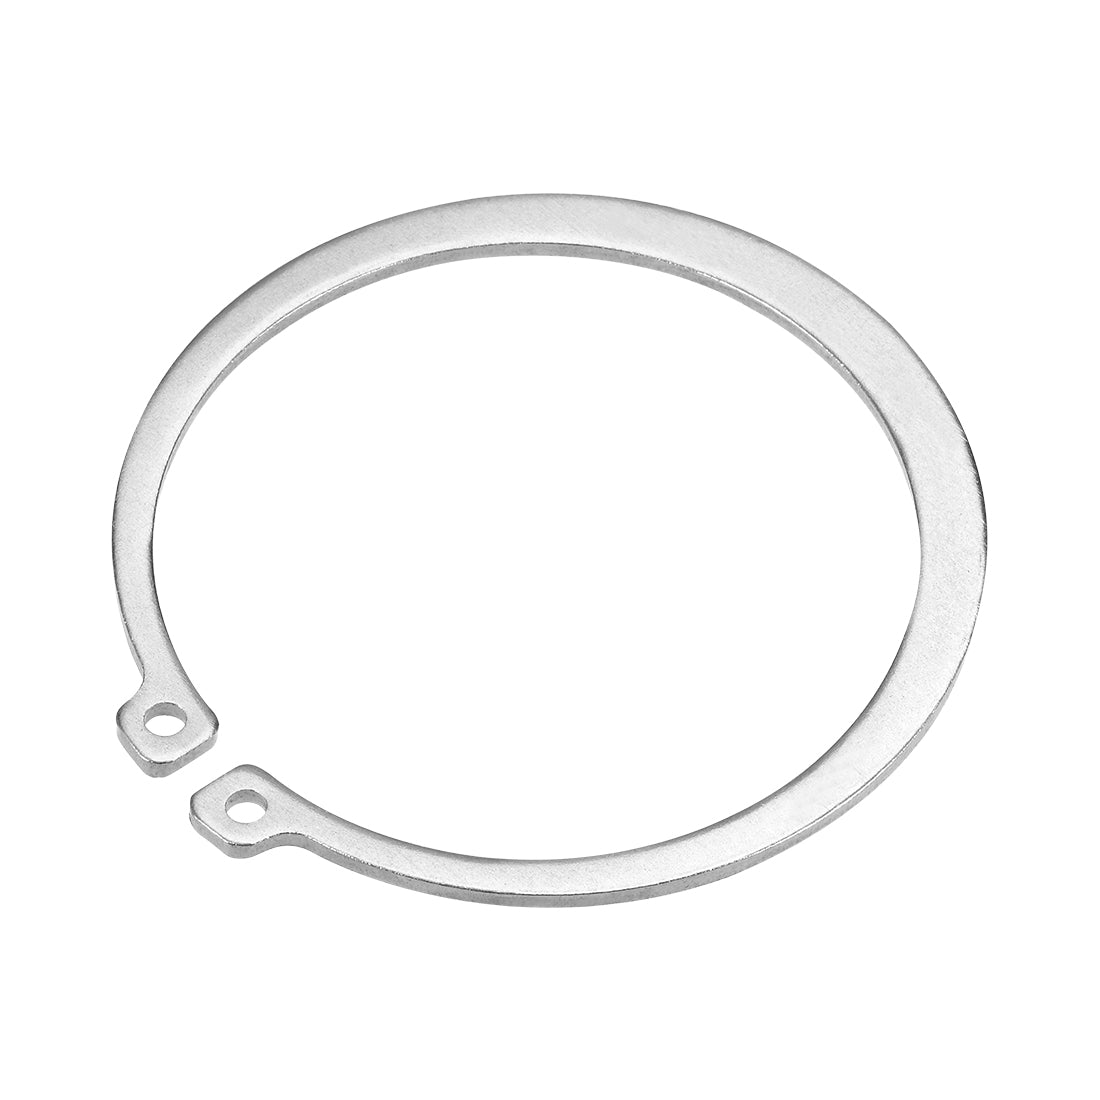 uxcell Uxcell 84.7mm External Circlips Retaining Shaft Snap Rings 304 Stainless Steel 1pcs